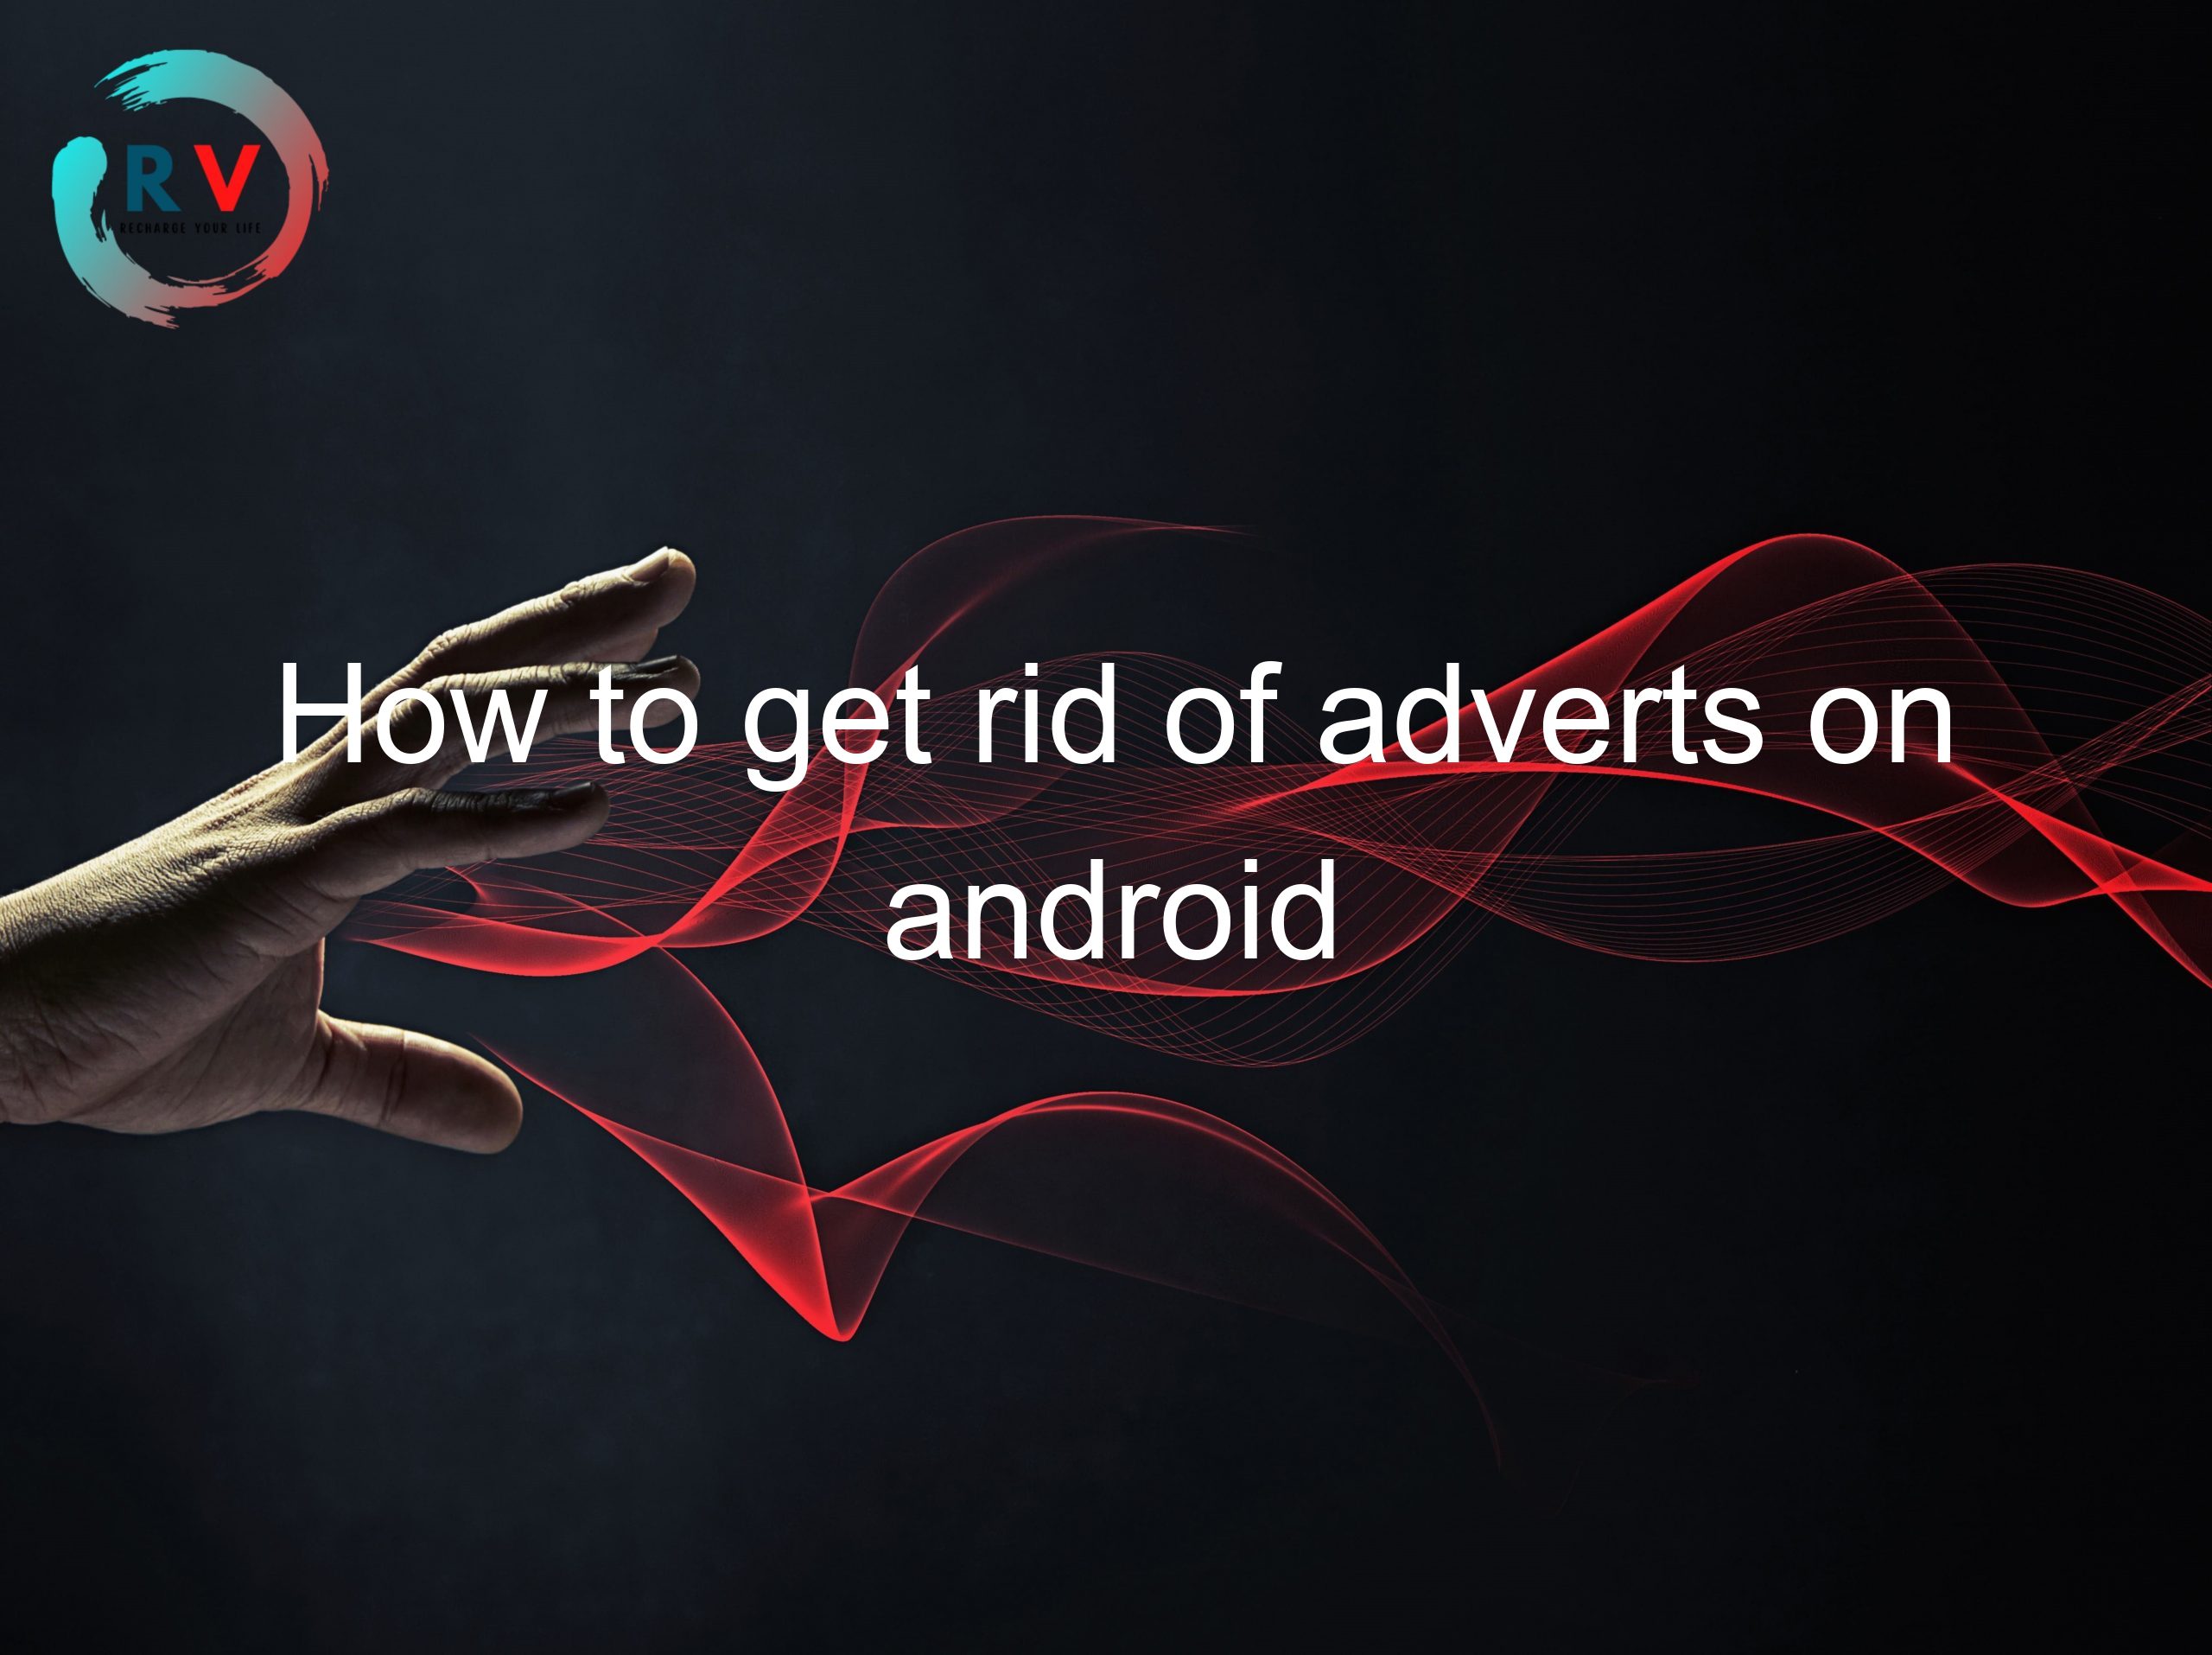 How to Get Rid of Adverts on Android: Tips and Tricks